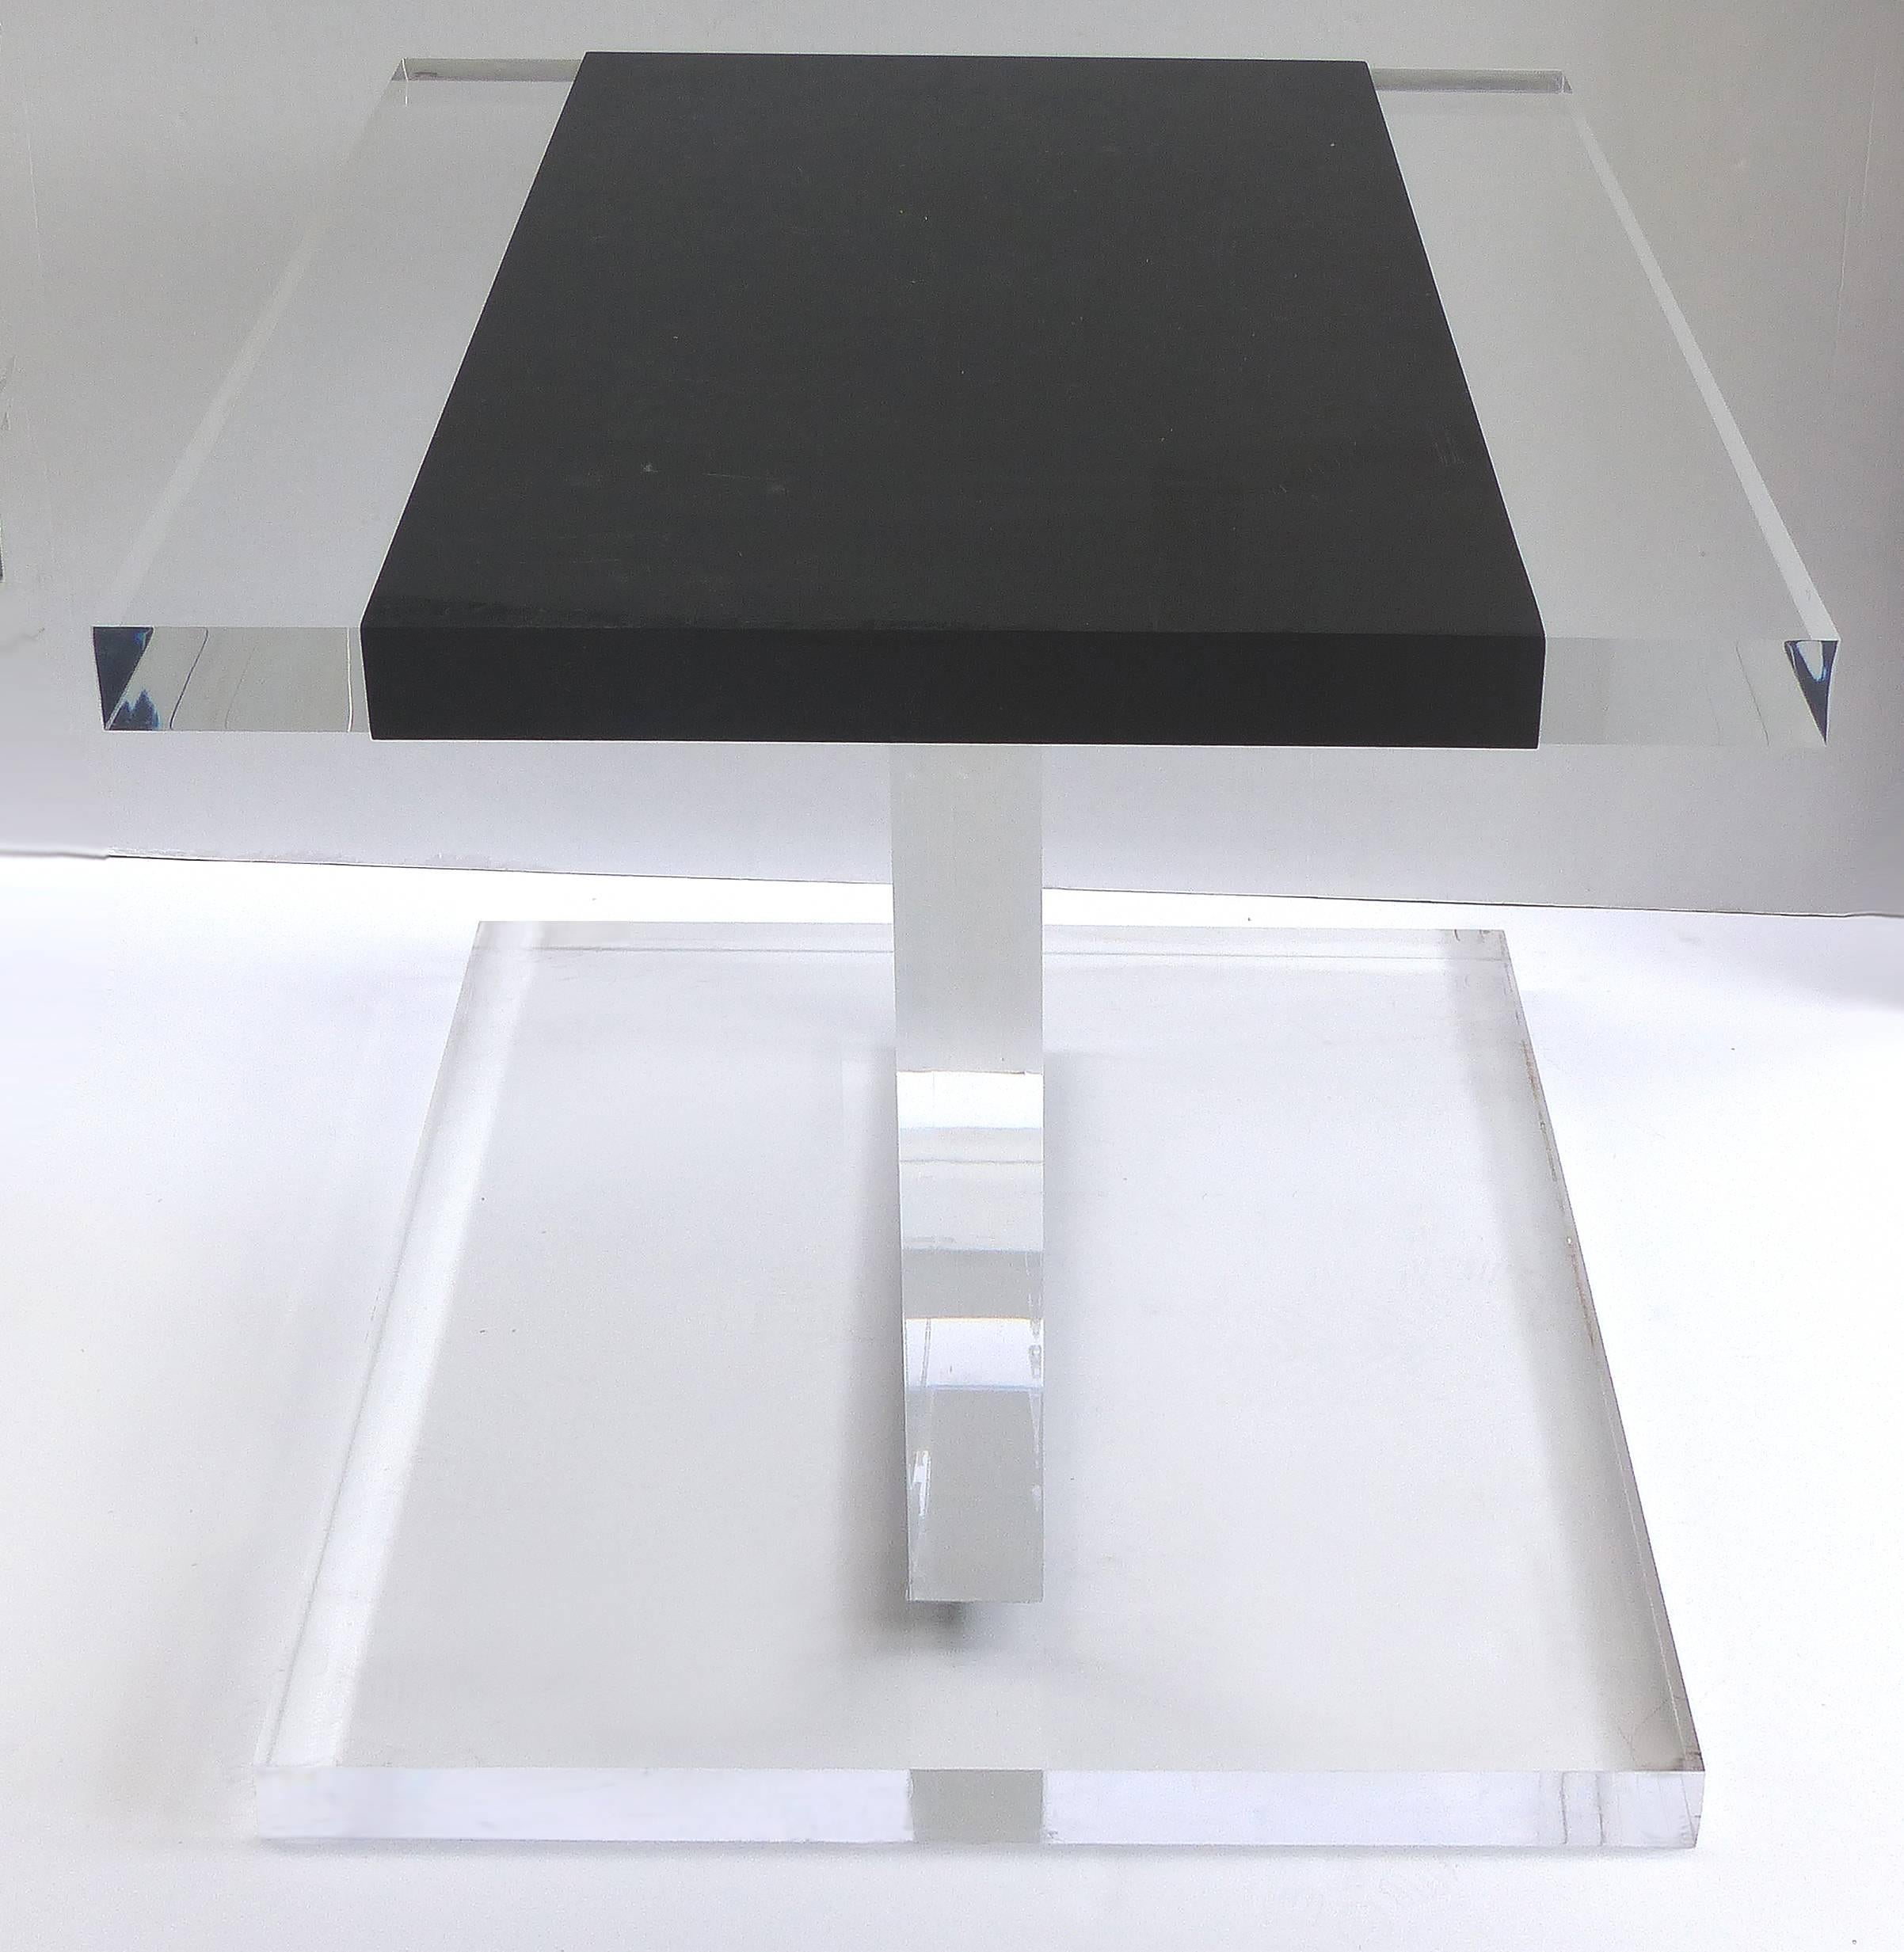 Custom Lucite Side Table with Removable Black Acrylic Sleeve

Offered for sale is a custom-made thick and heavy Lucite side table or pedestal with a removable black plastic sleeve. The Lucite is 1.6